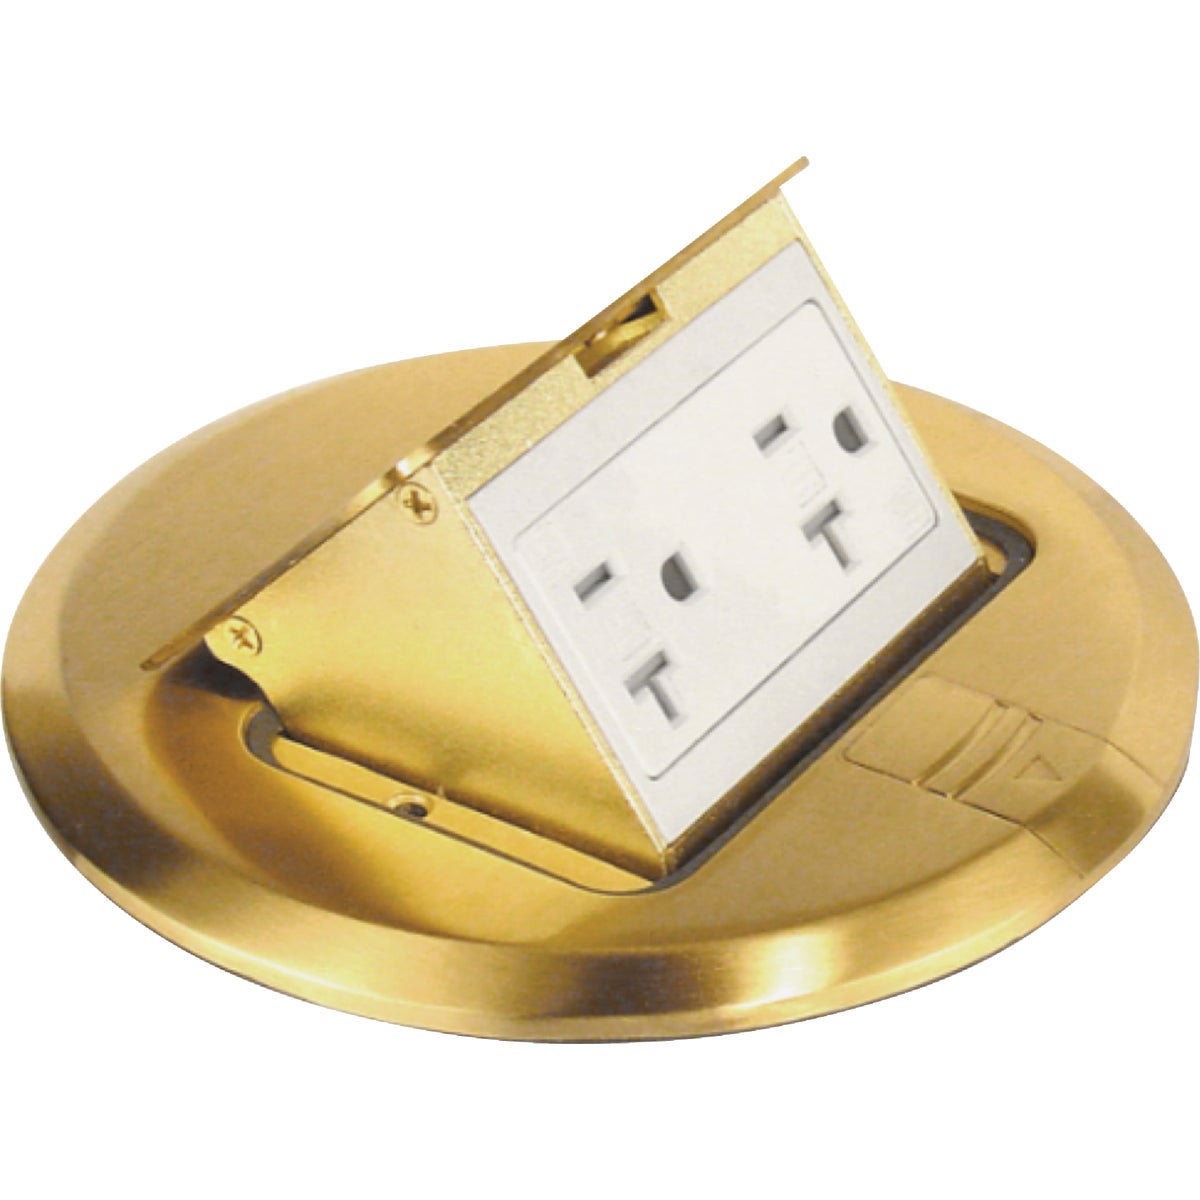 Southwire Brass 5.6 In. x 5.9 In. Floor Box Outlet Kit